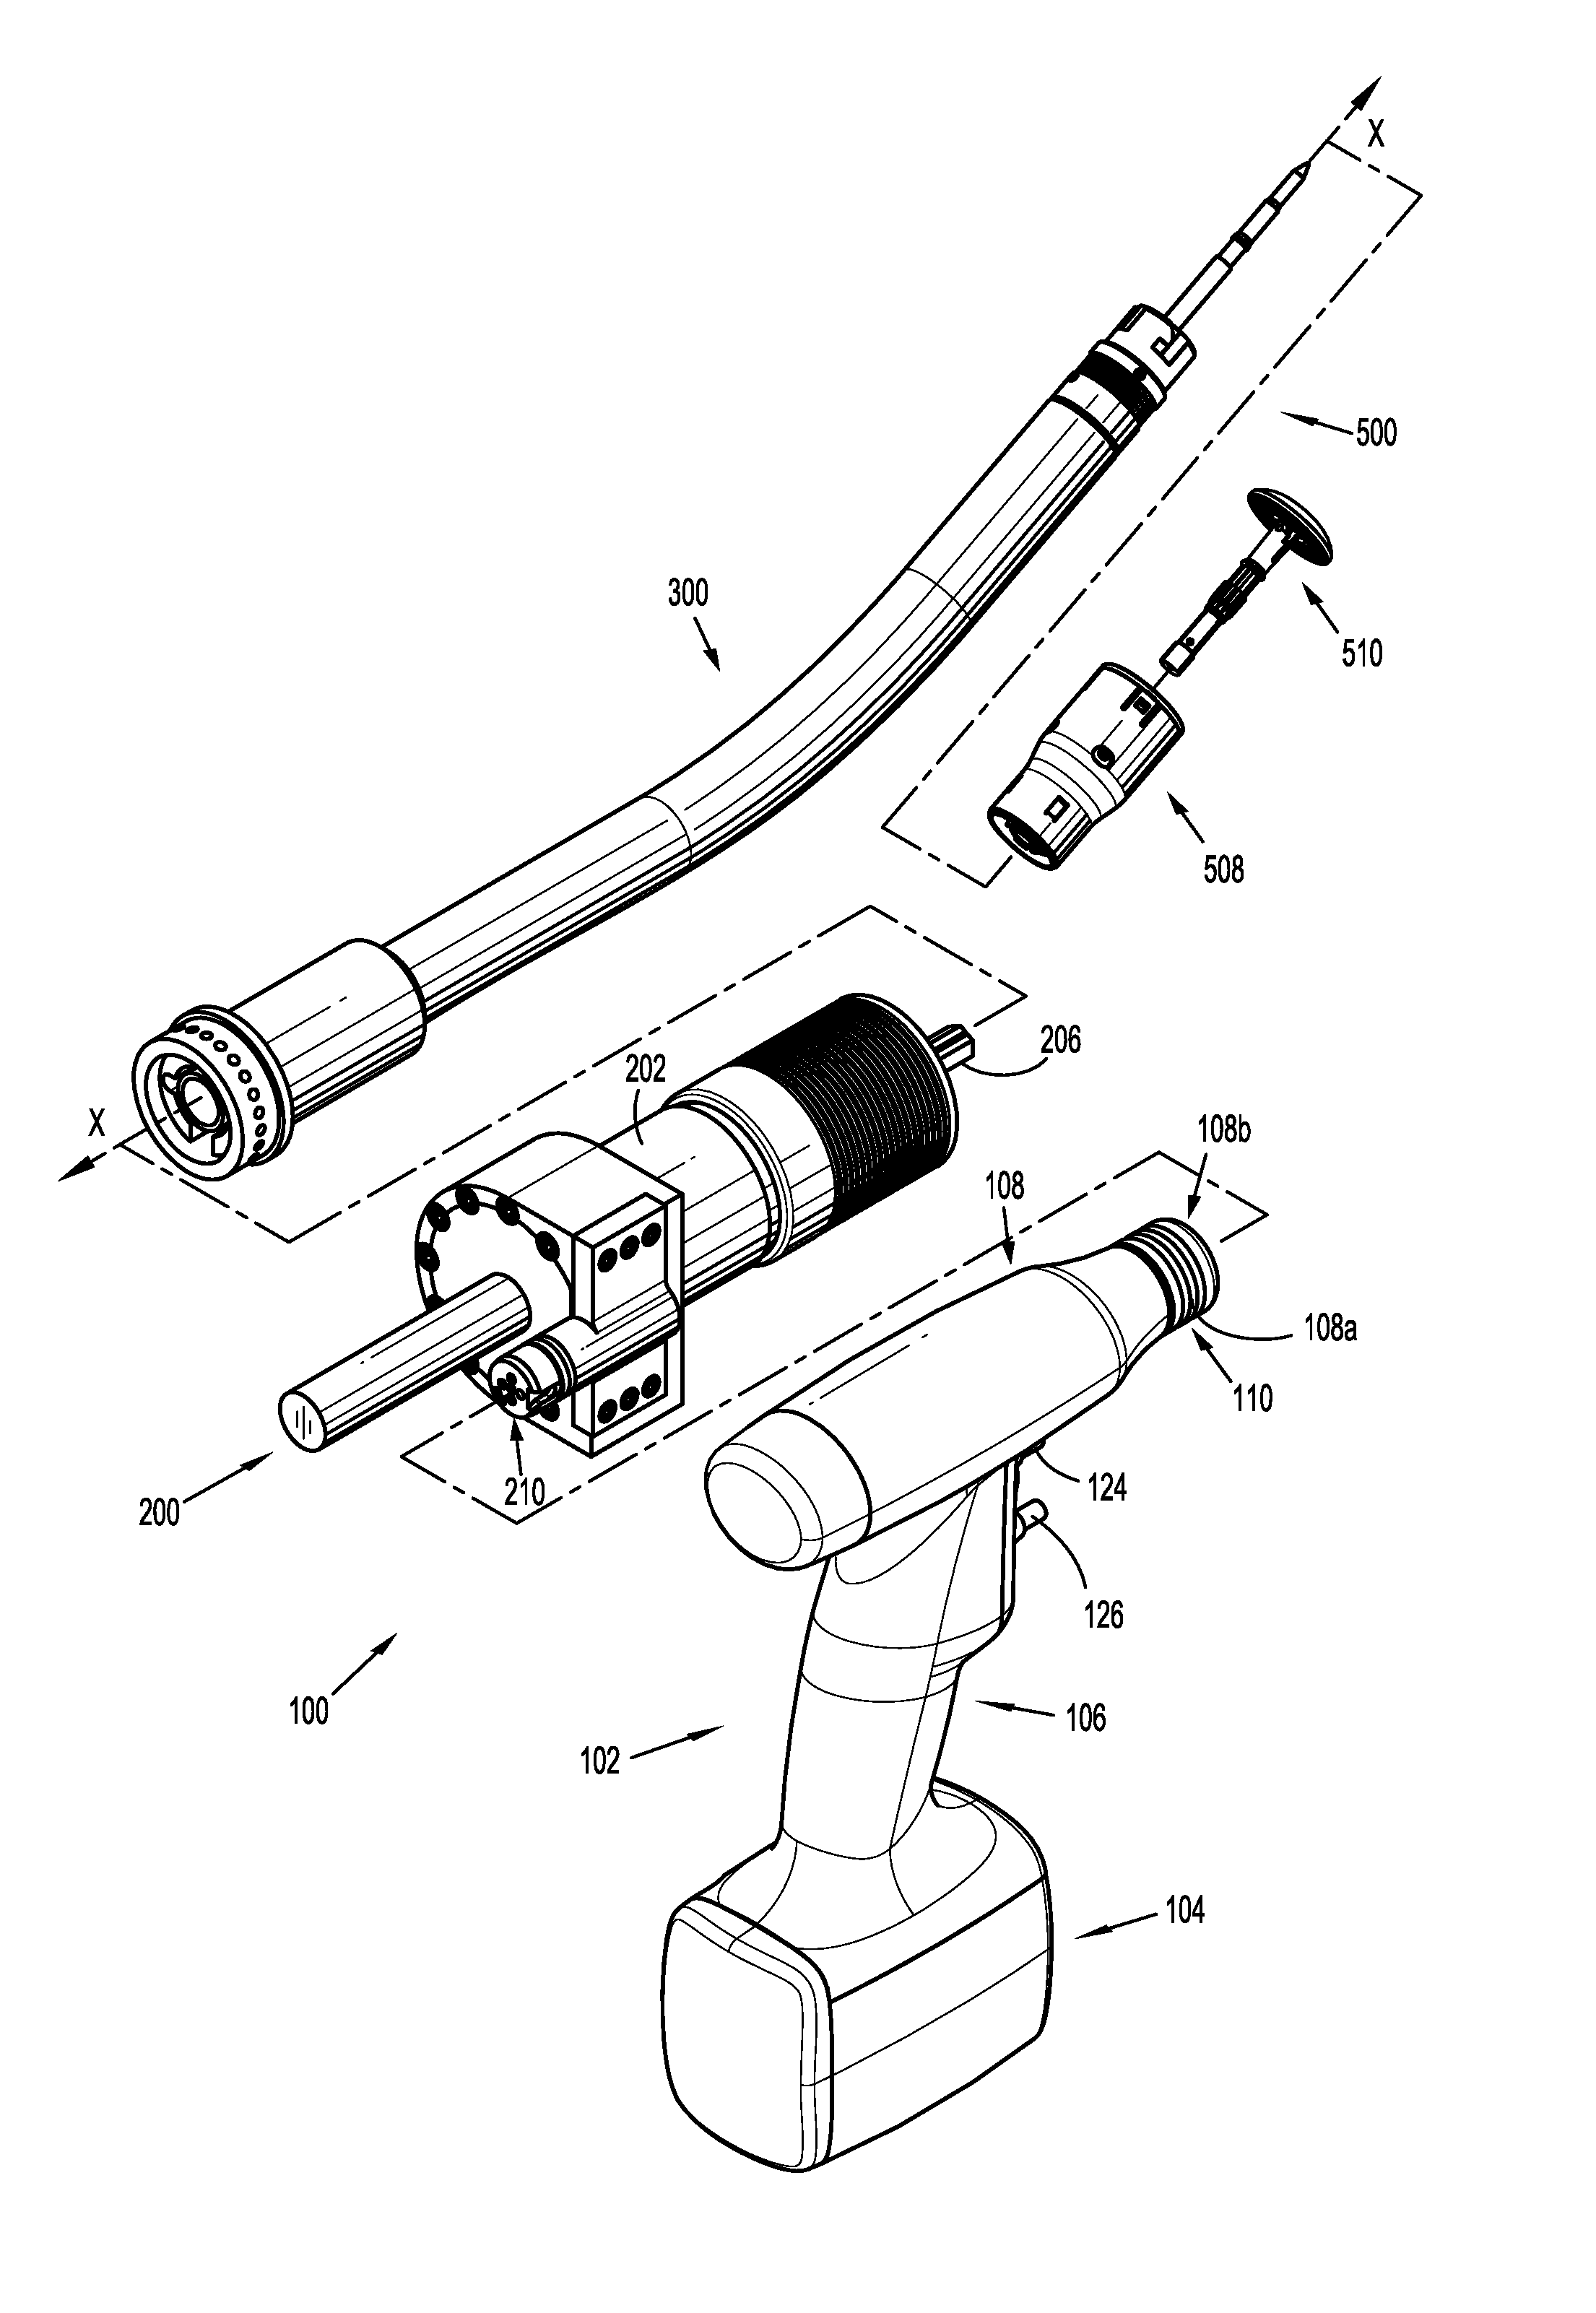 Surgical device, surgical adapters for use between surgical handle assembly and surgical loading units, and methods of use